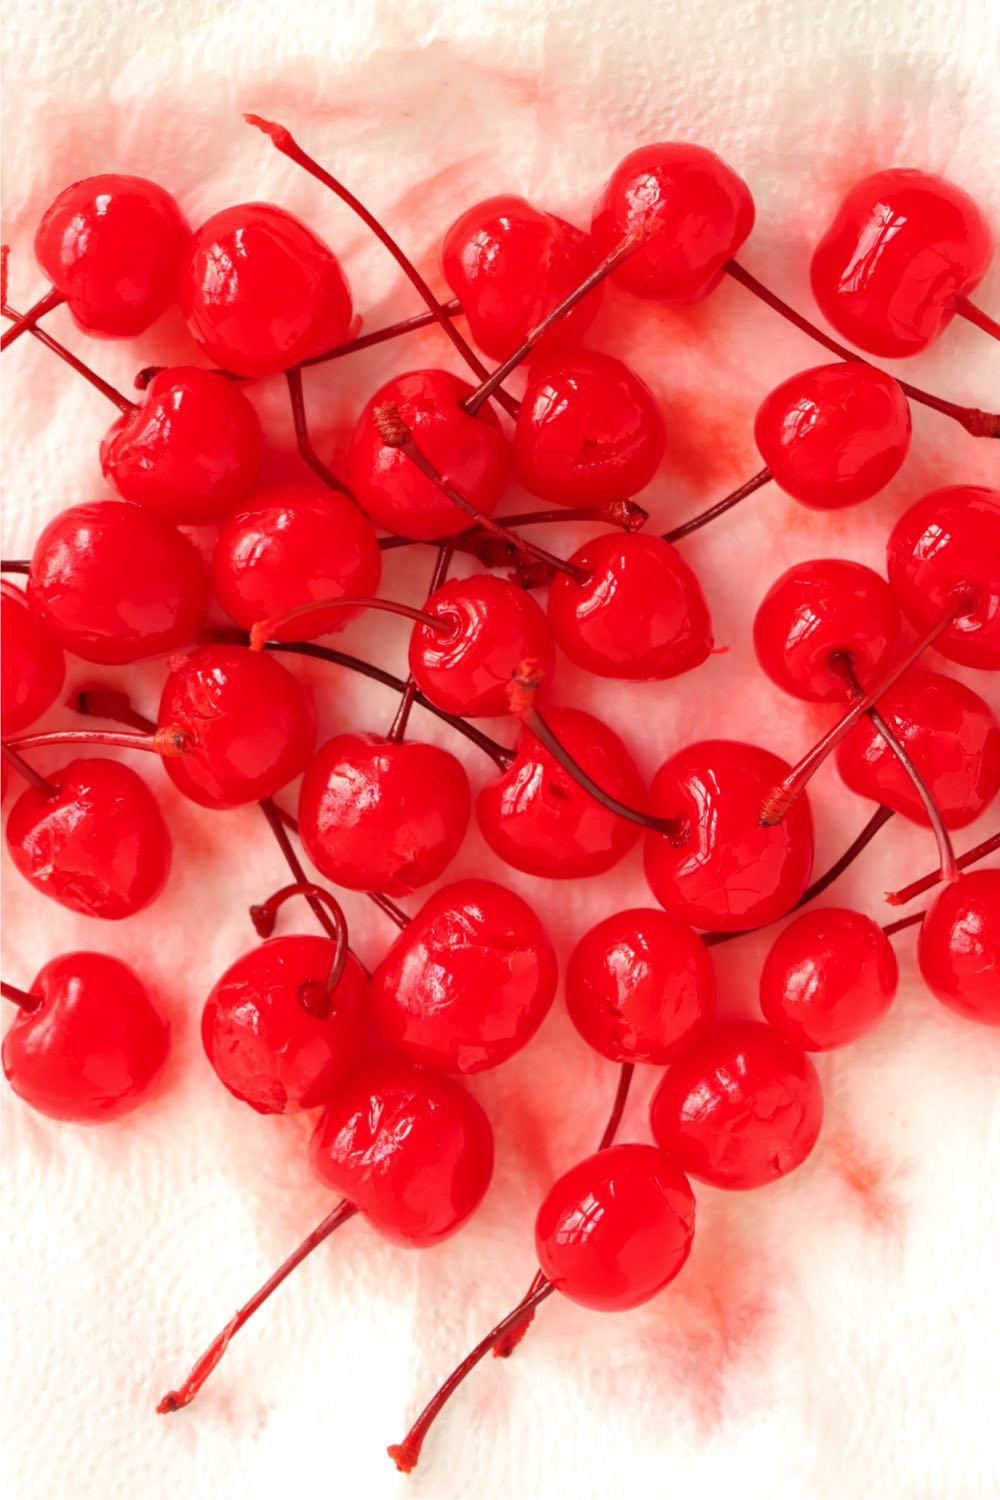 Cherries draining on a piece of paper toweling.